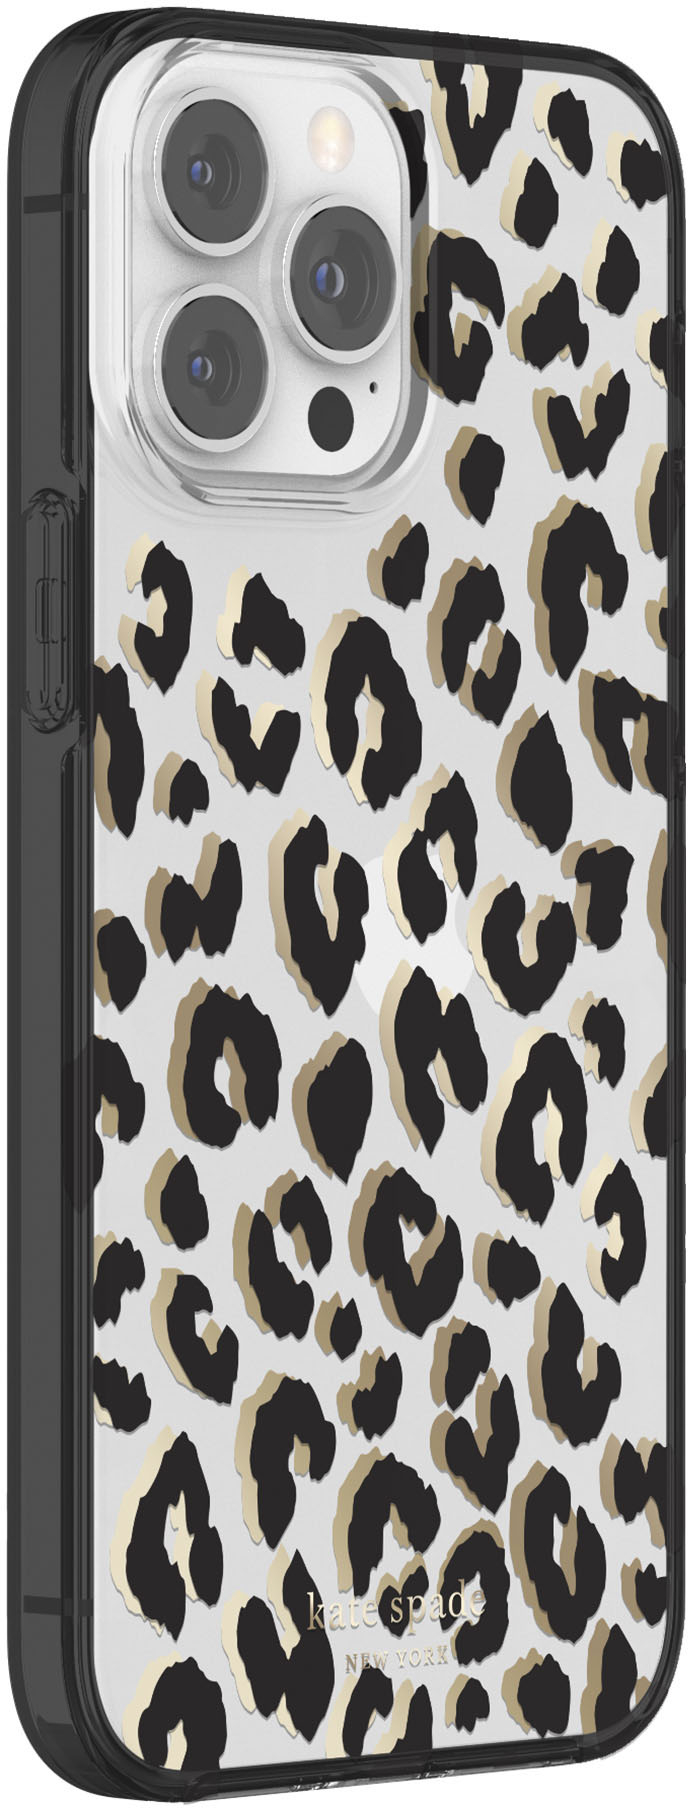 Left View: kate spade new york - Protective Hardshell Case for iPhone 13/12 Pro Max - Leopard